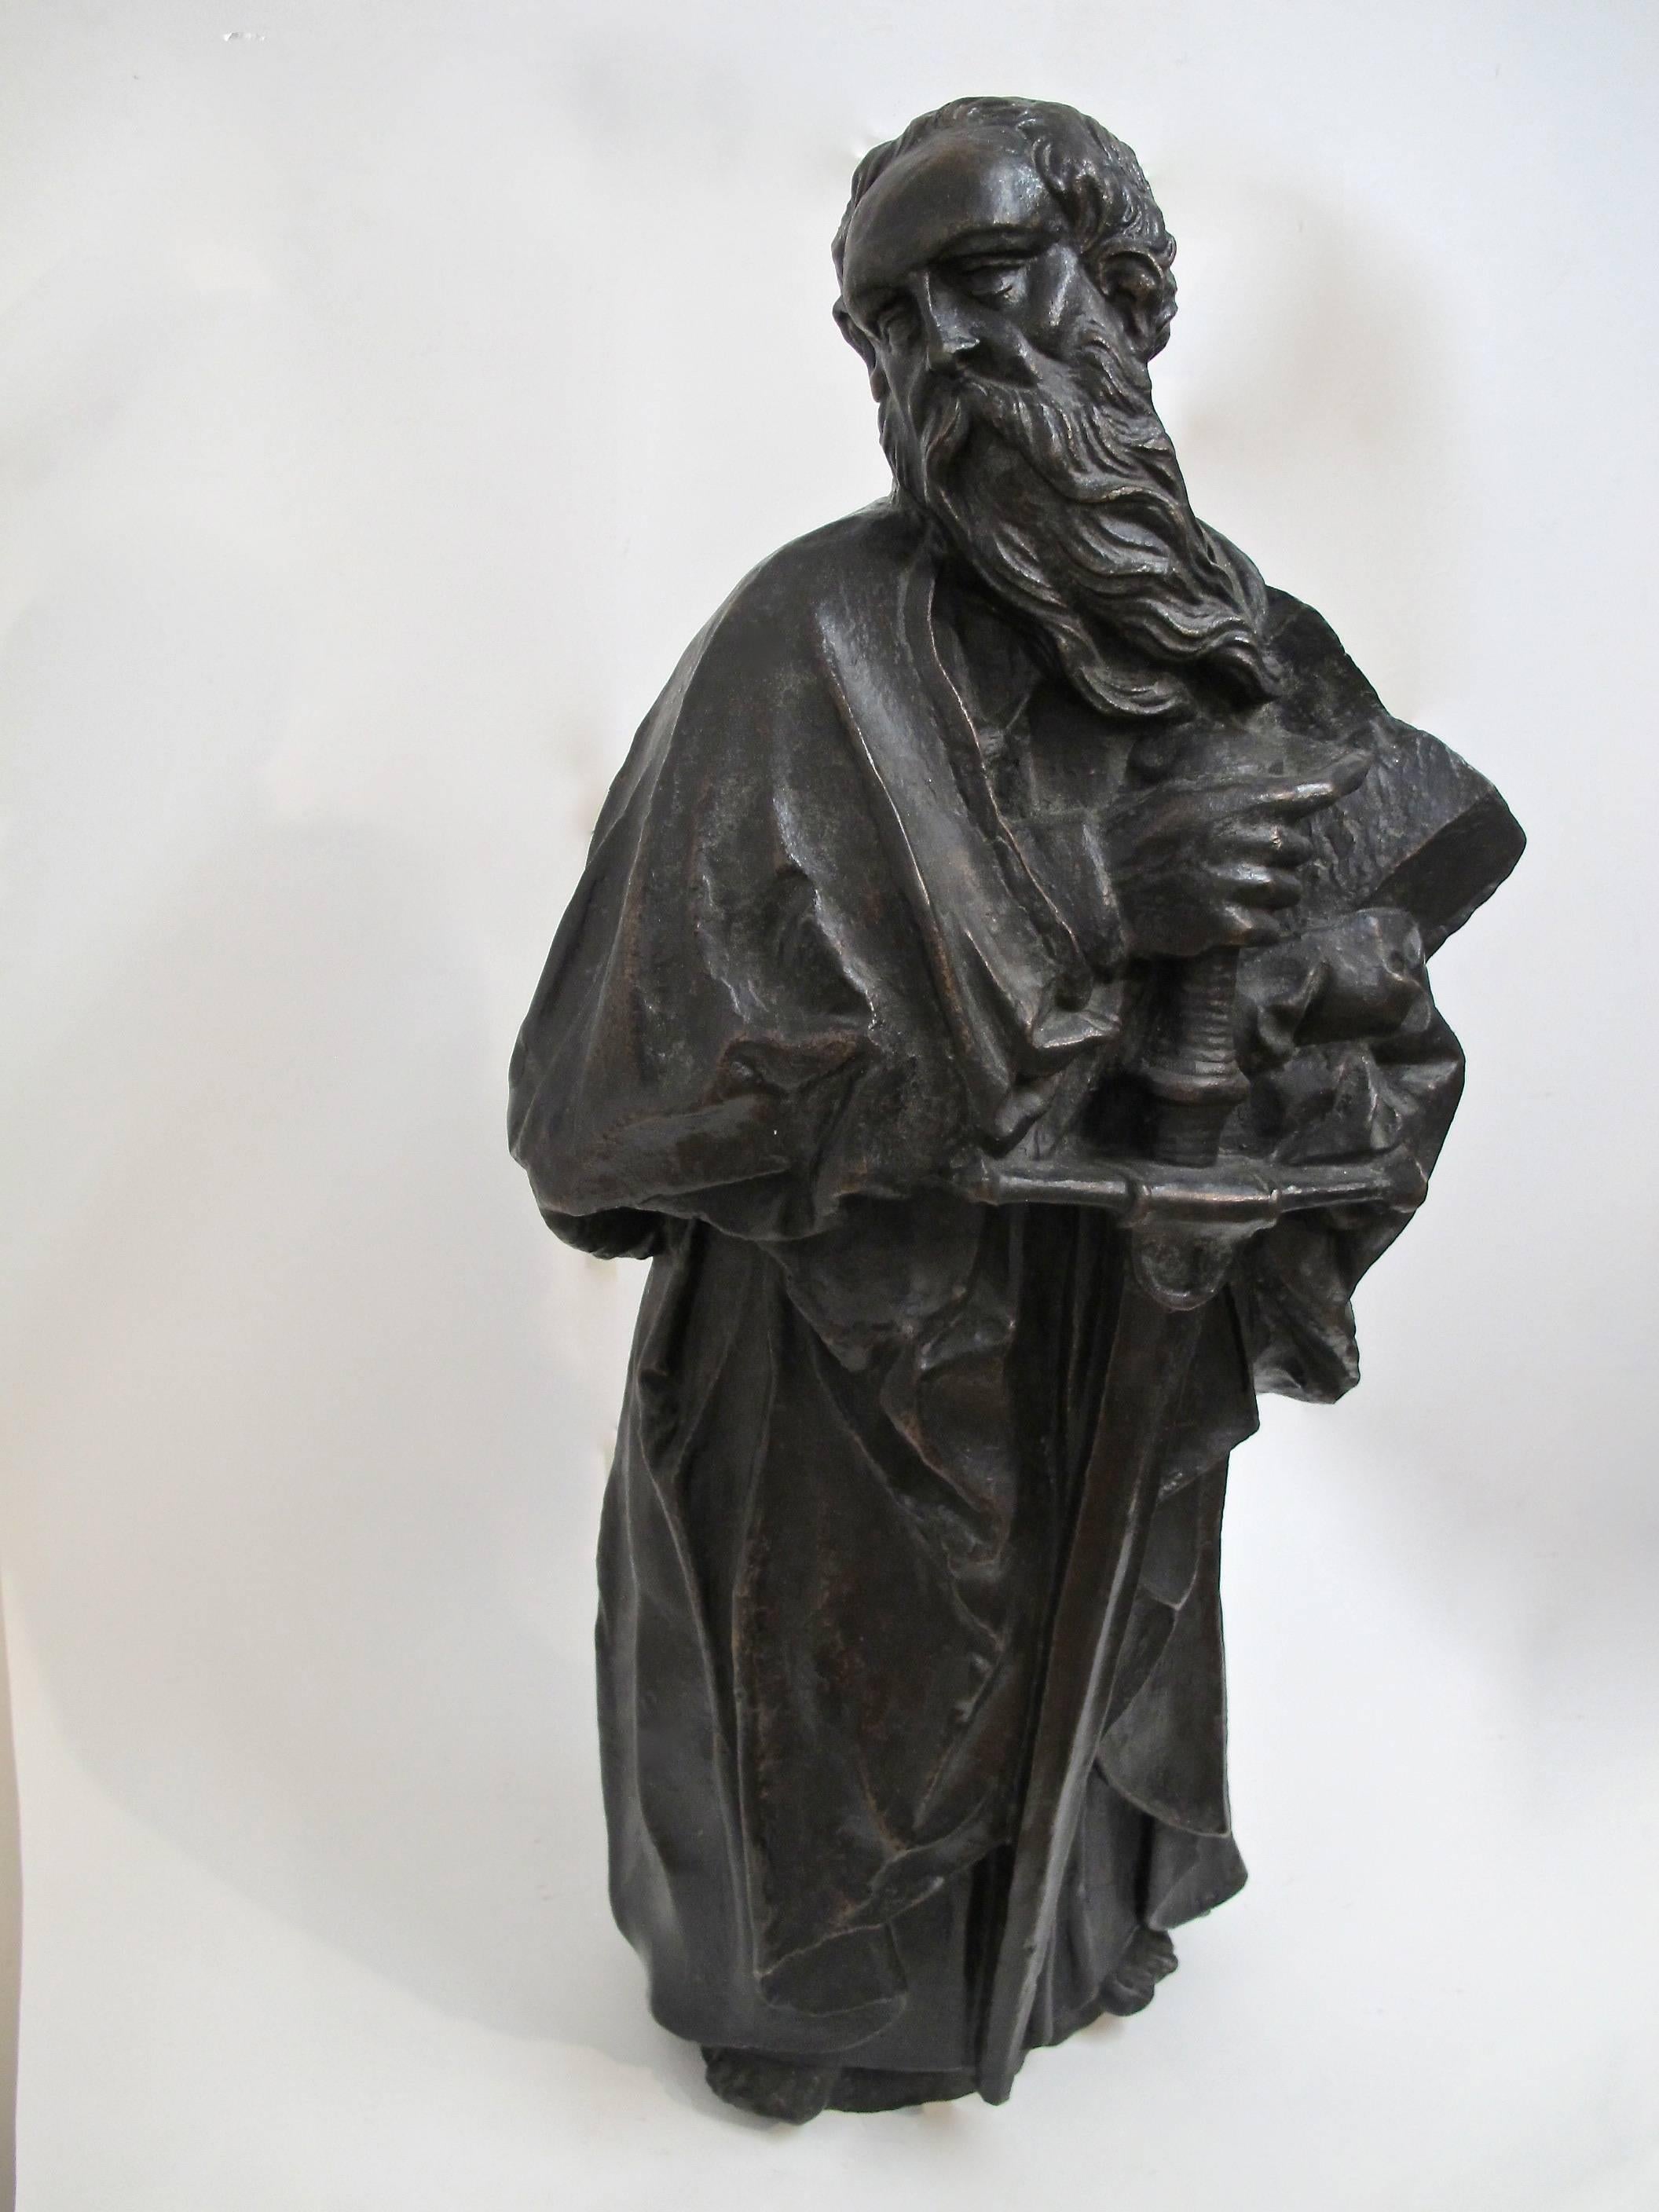 A large scale cast bronze statue of Moses. Continental, late 18th-early 19th century.